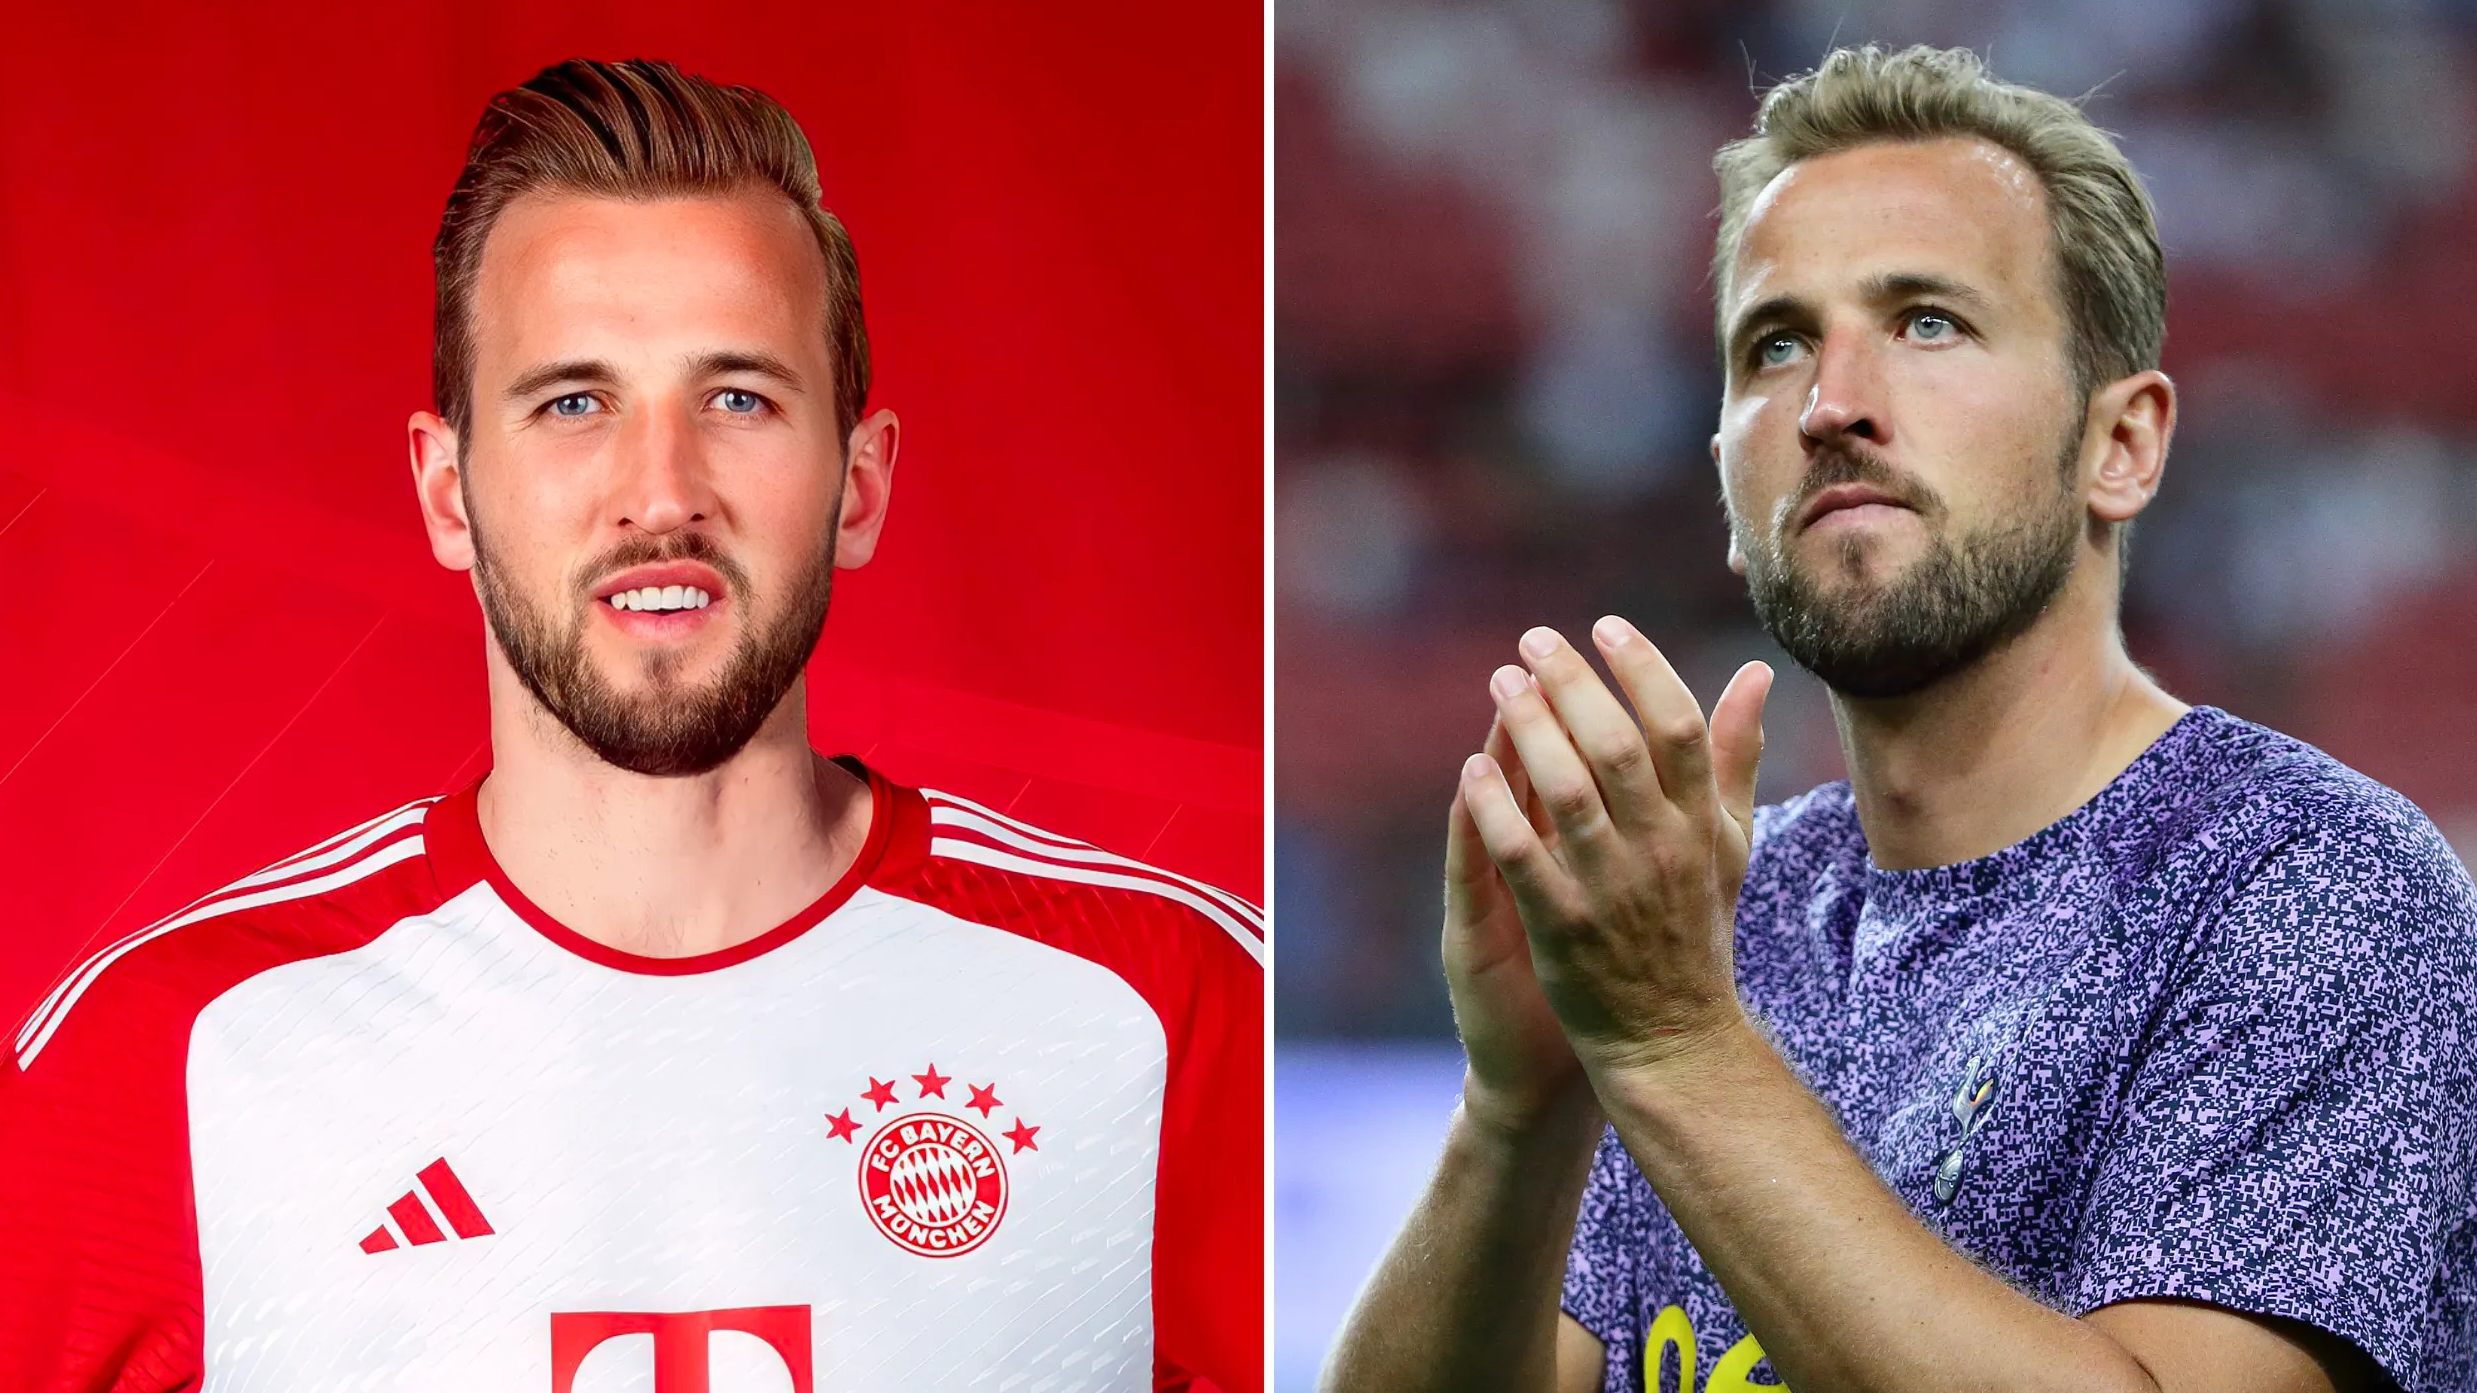 Harry Kane pictured in Bayern Munich shirt as he signs for German